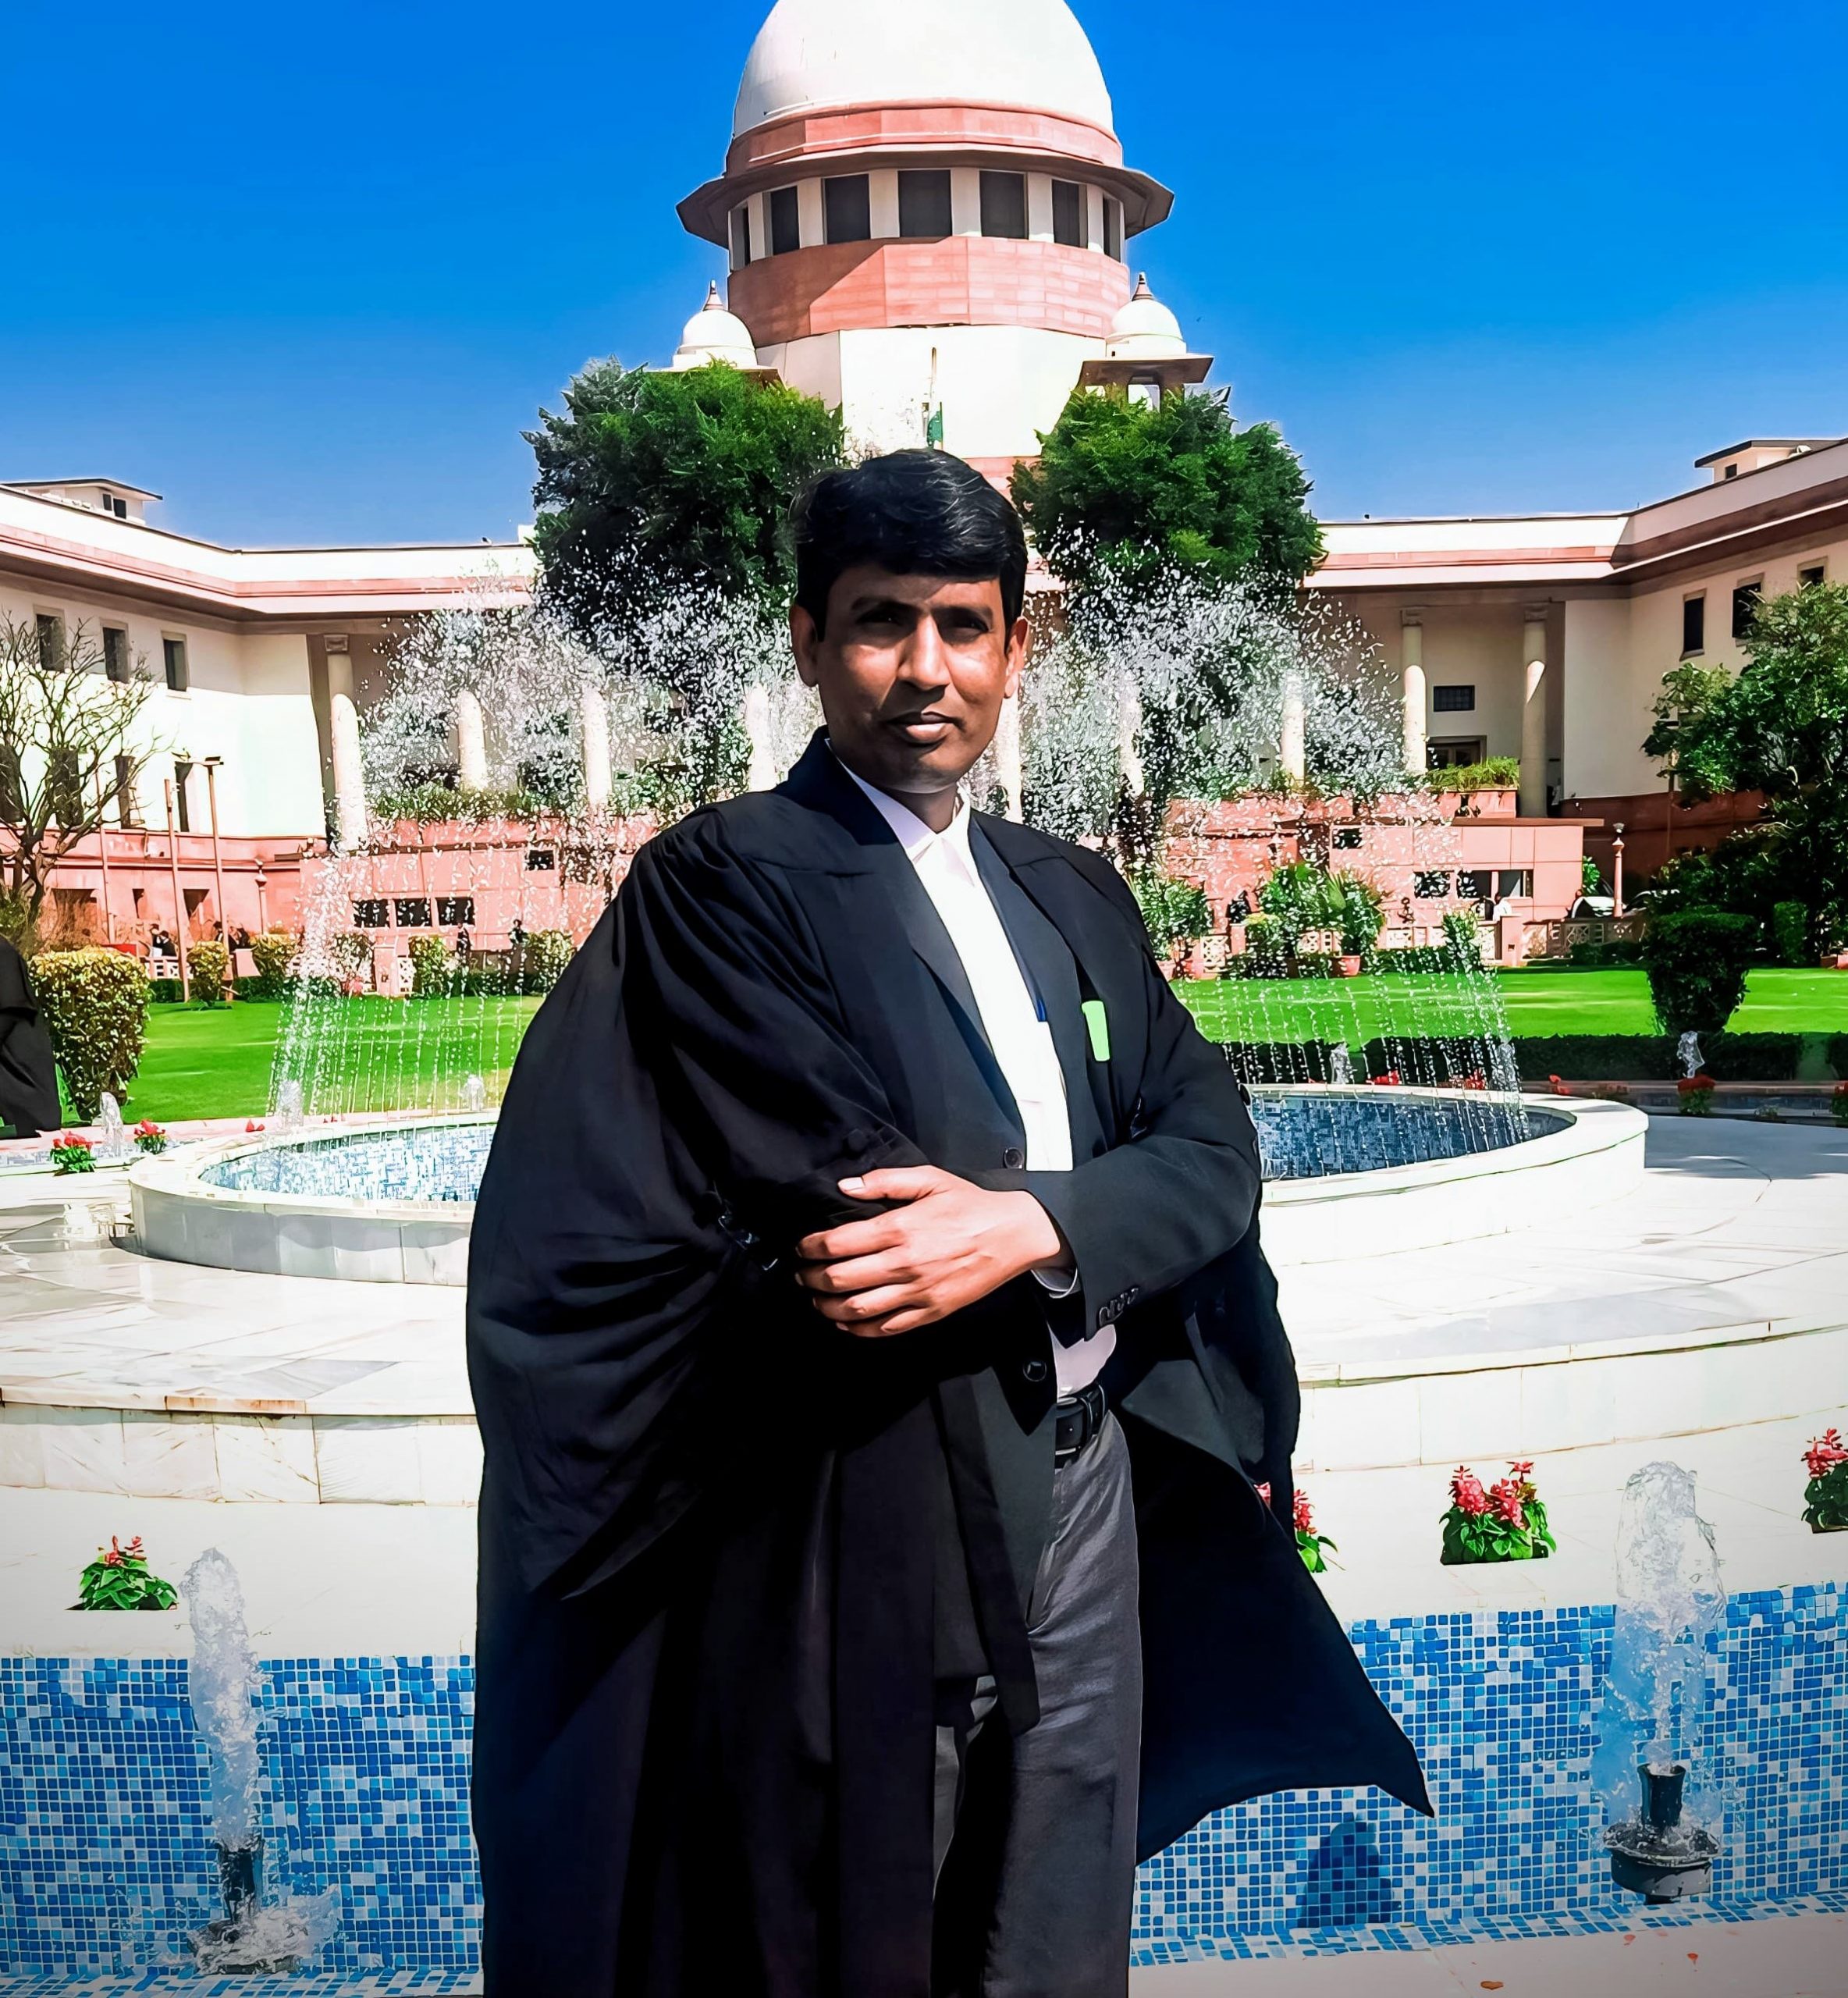 Should Indian lawyers do away with robes? Dress code in the spotlight after  law minister's remark – Firstpost